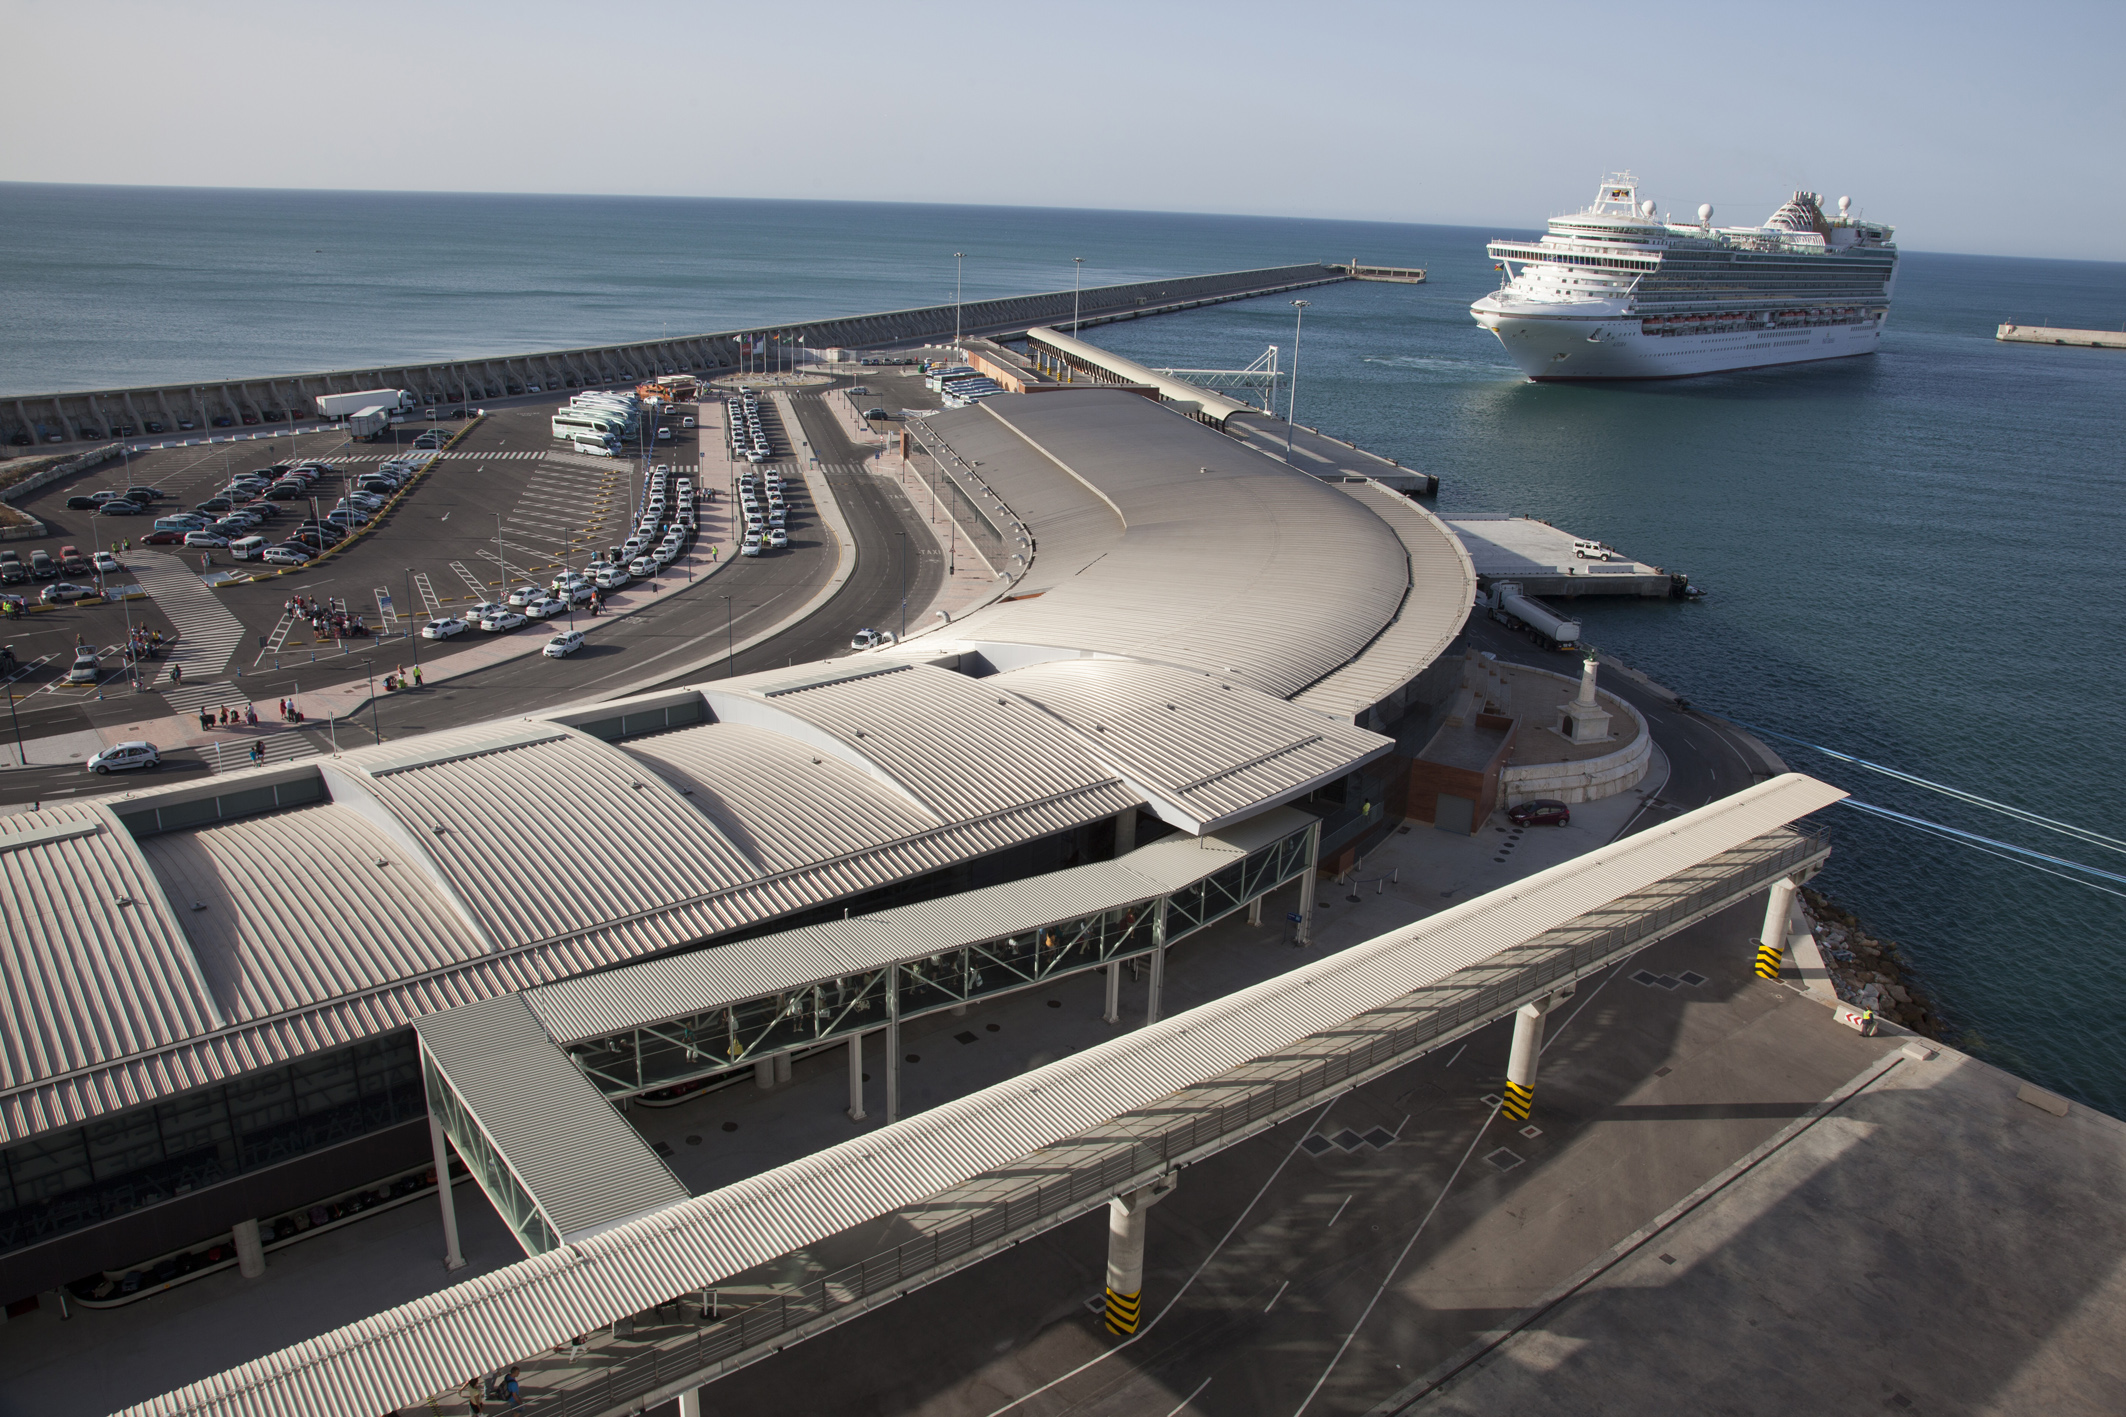 Port of Málaga ready to resume cruise traffic, following regional approval protocol